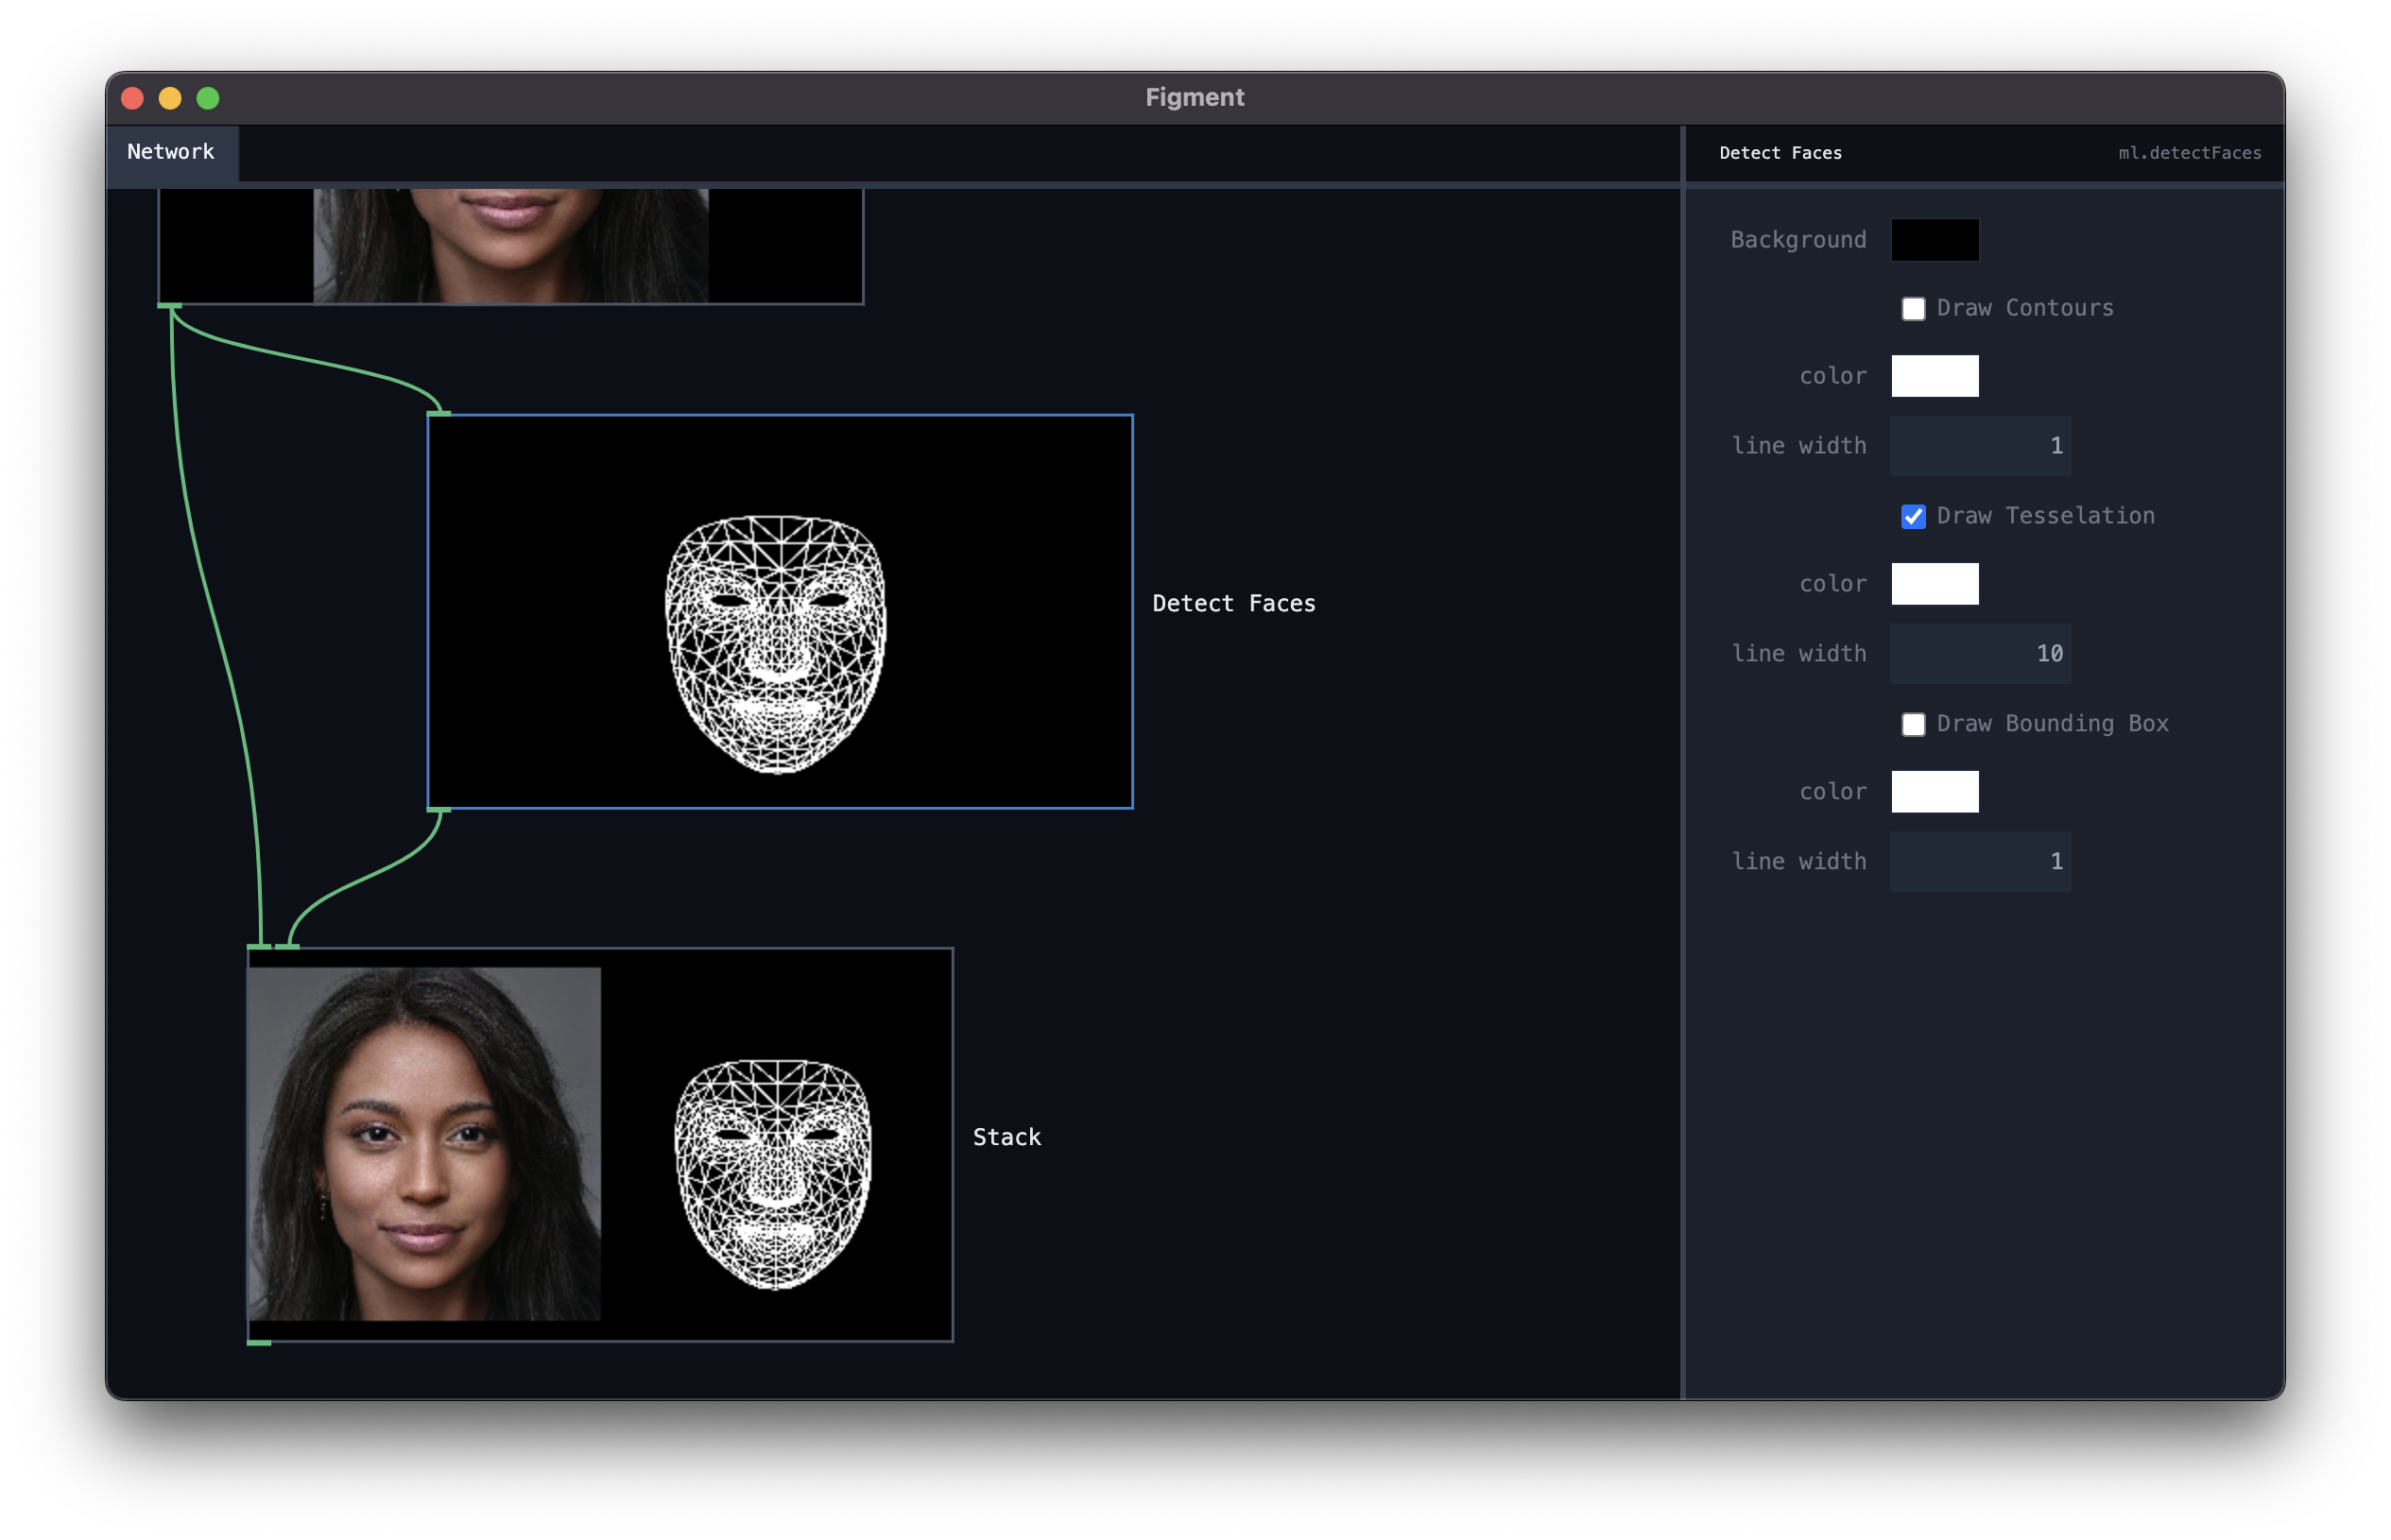 Screenshot of the Figment app demonstrating face detection